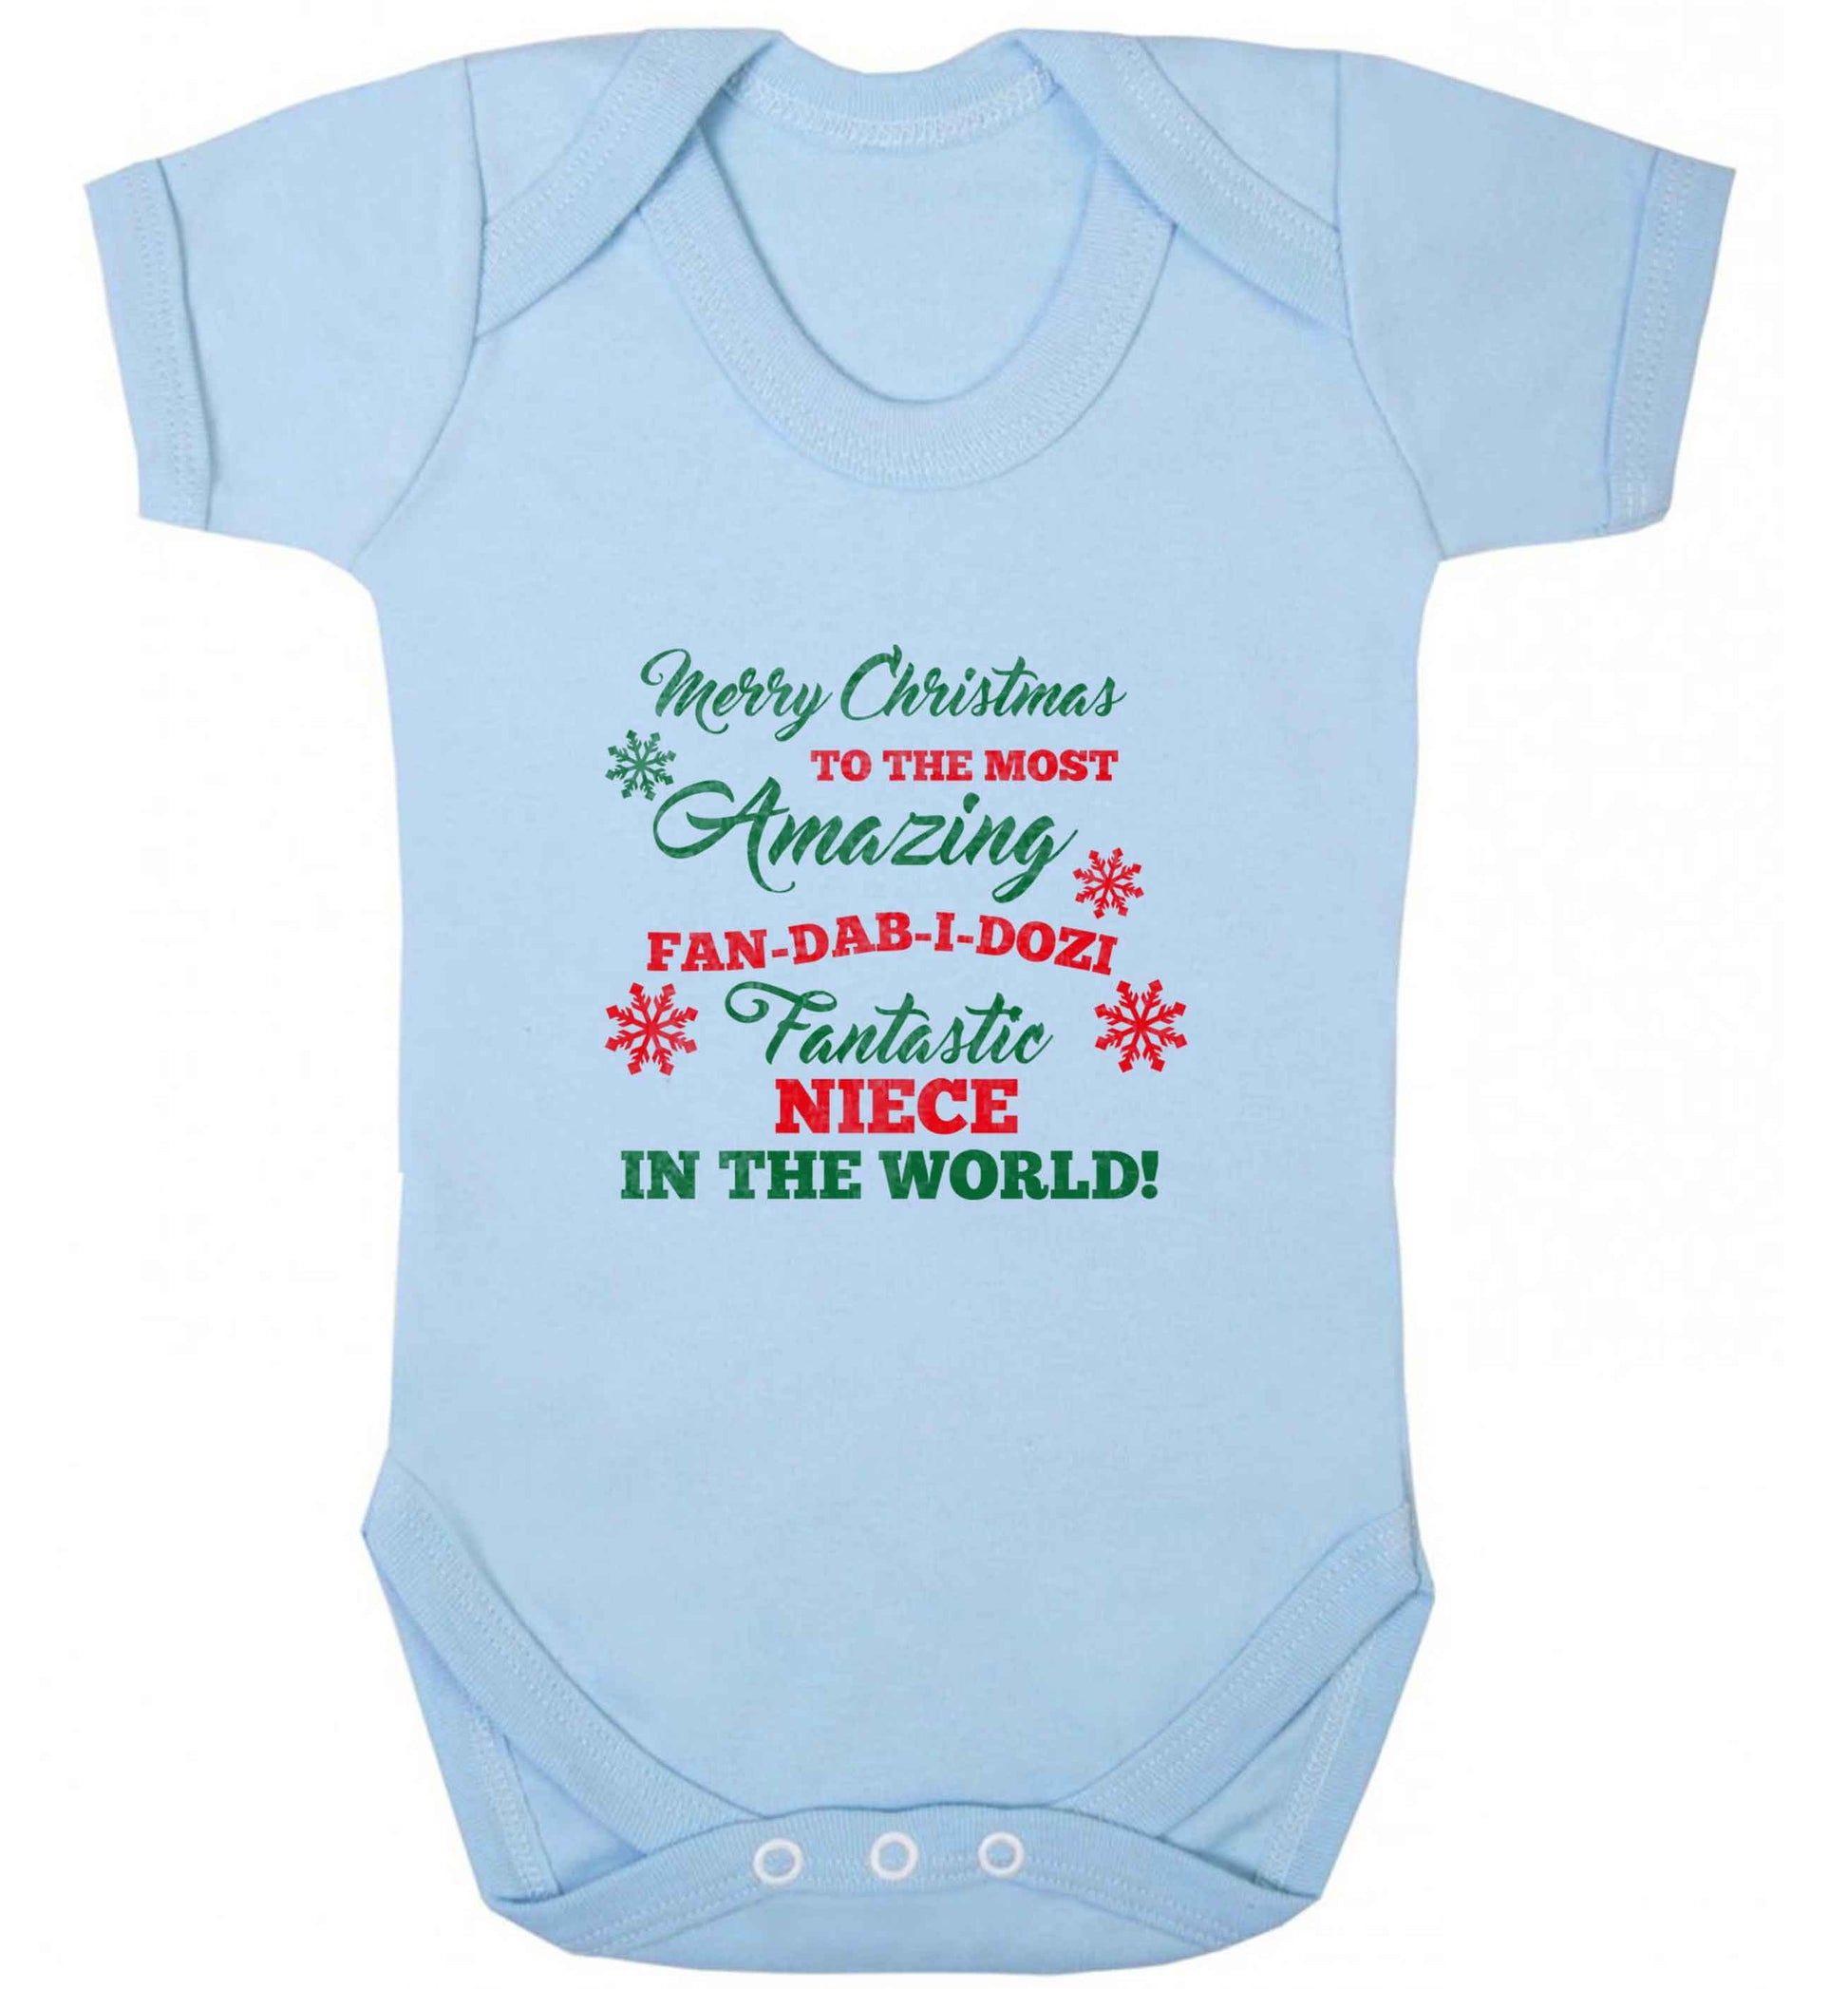 Merry Christmas to the most amazing fan-dab-i-dozi fantasic Niece in the world baby vest pale blue 18-24 months